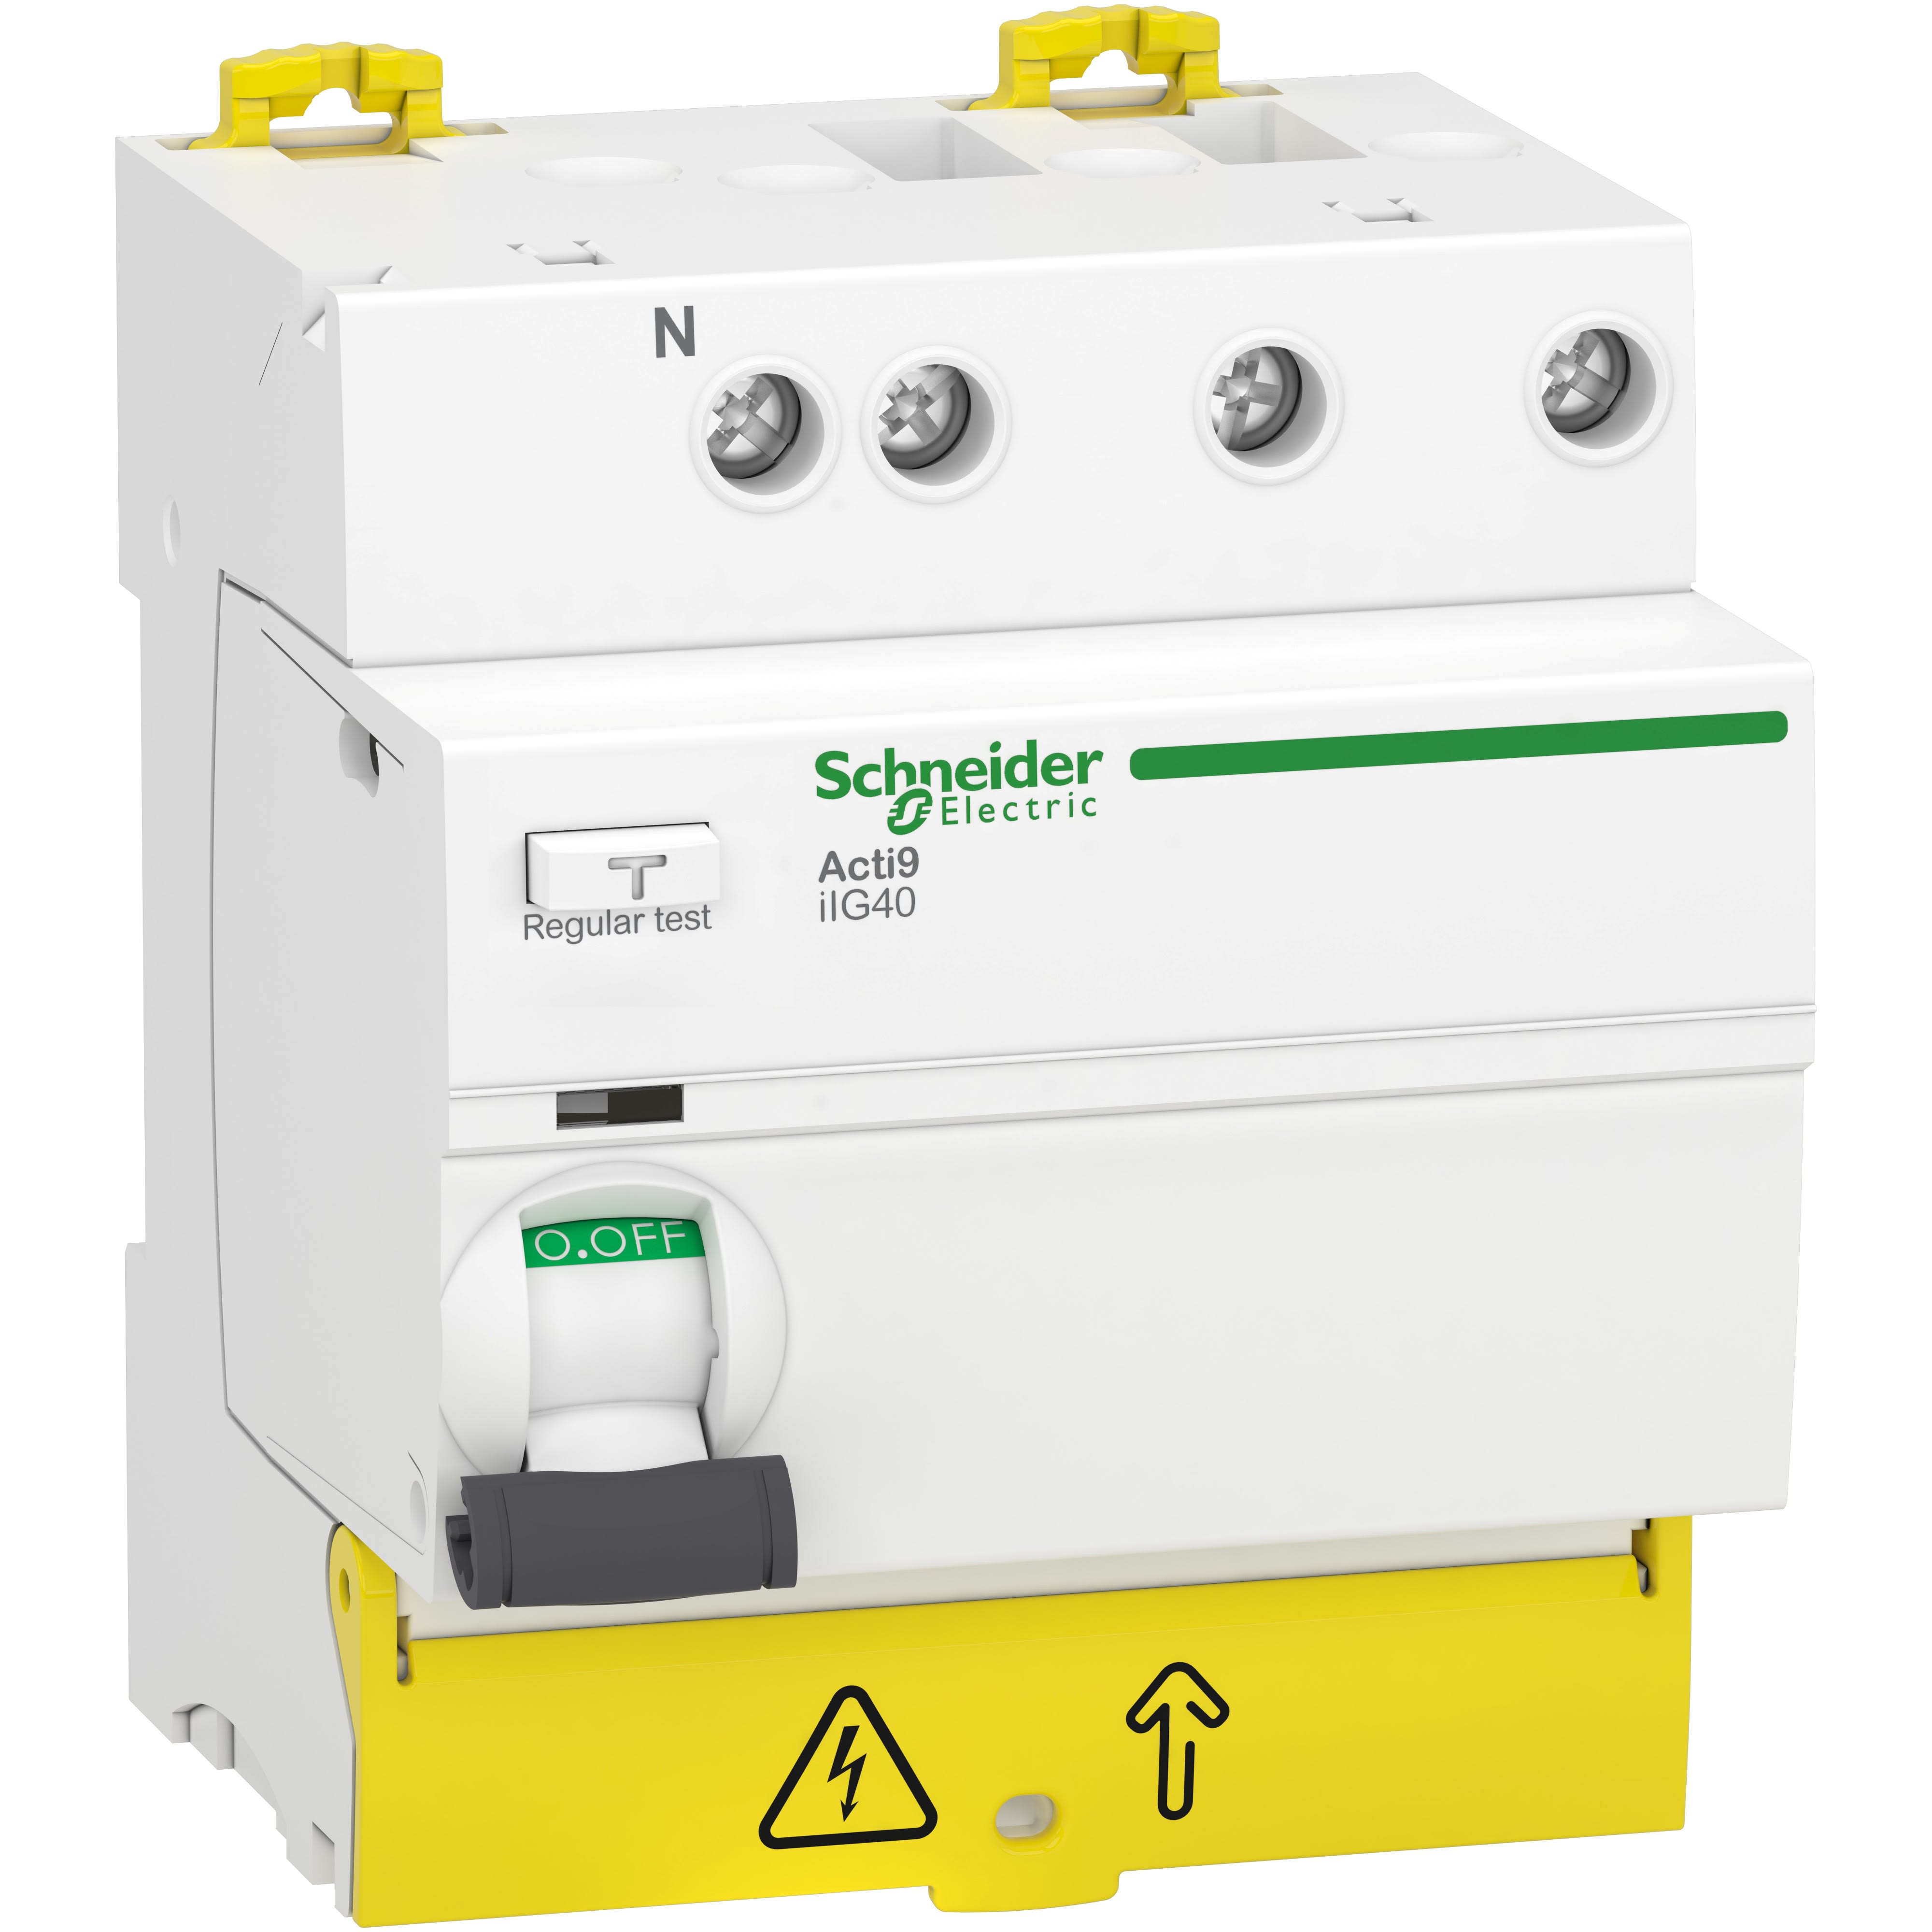 Schneider Electric - Acti9 iIG40 - Inter. diff tete de groupe - 3P+N - 63A - 30mA - Type AC